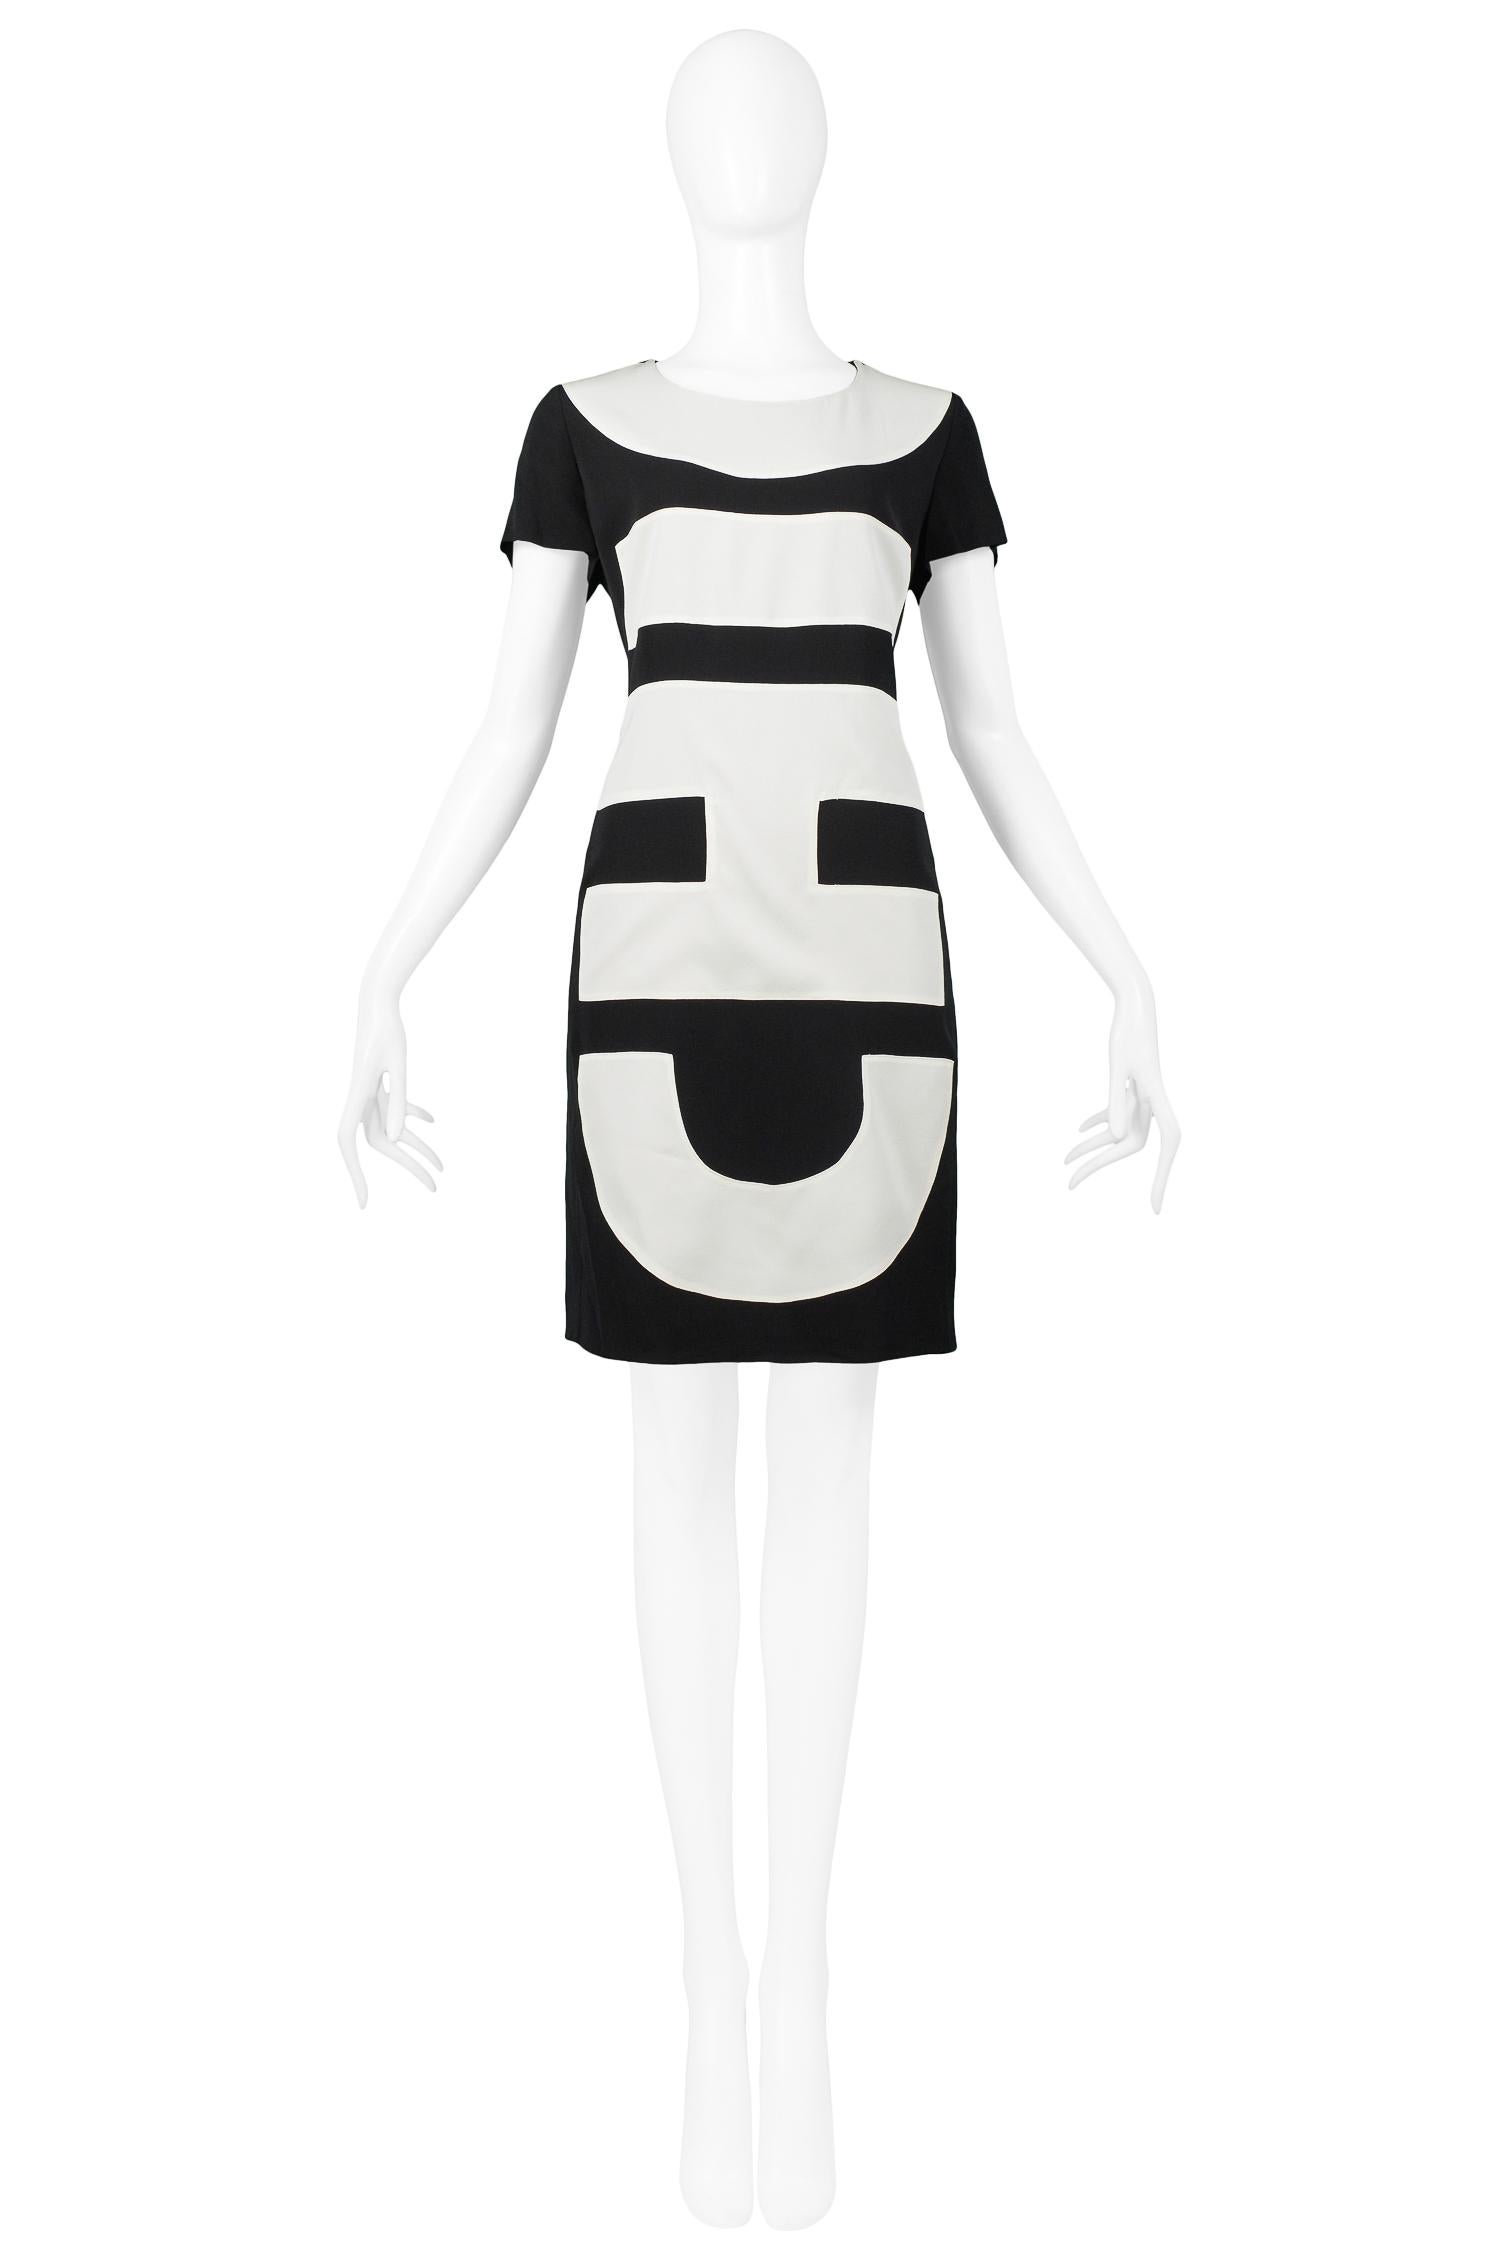 Resurrection Vintage is excited to offer a vintage Moschino dress that features white inset letters that read 